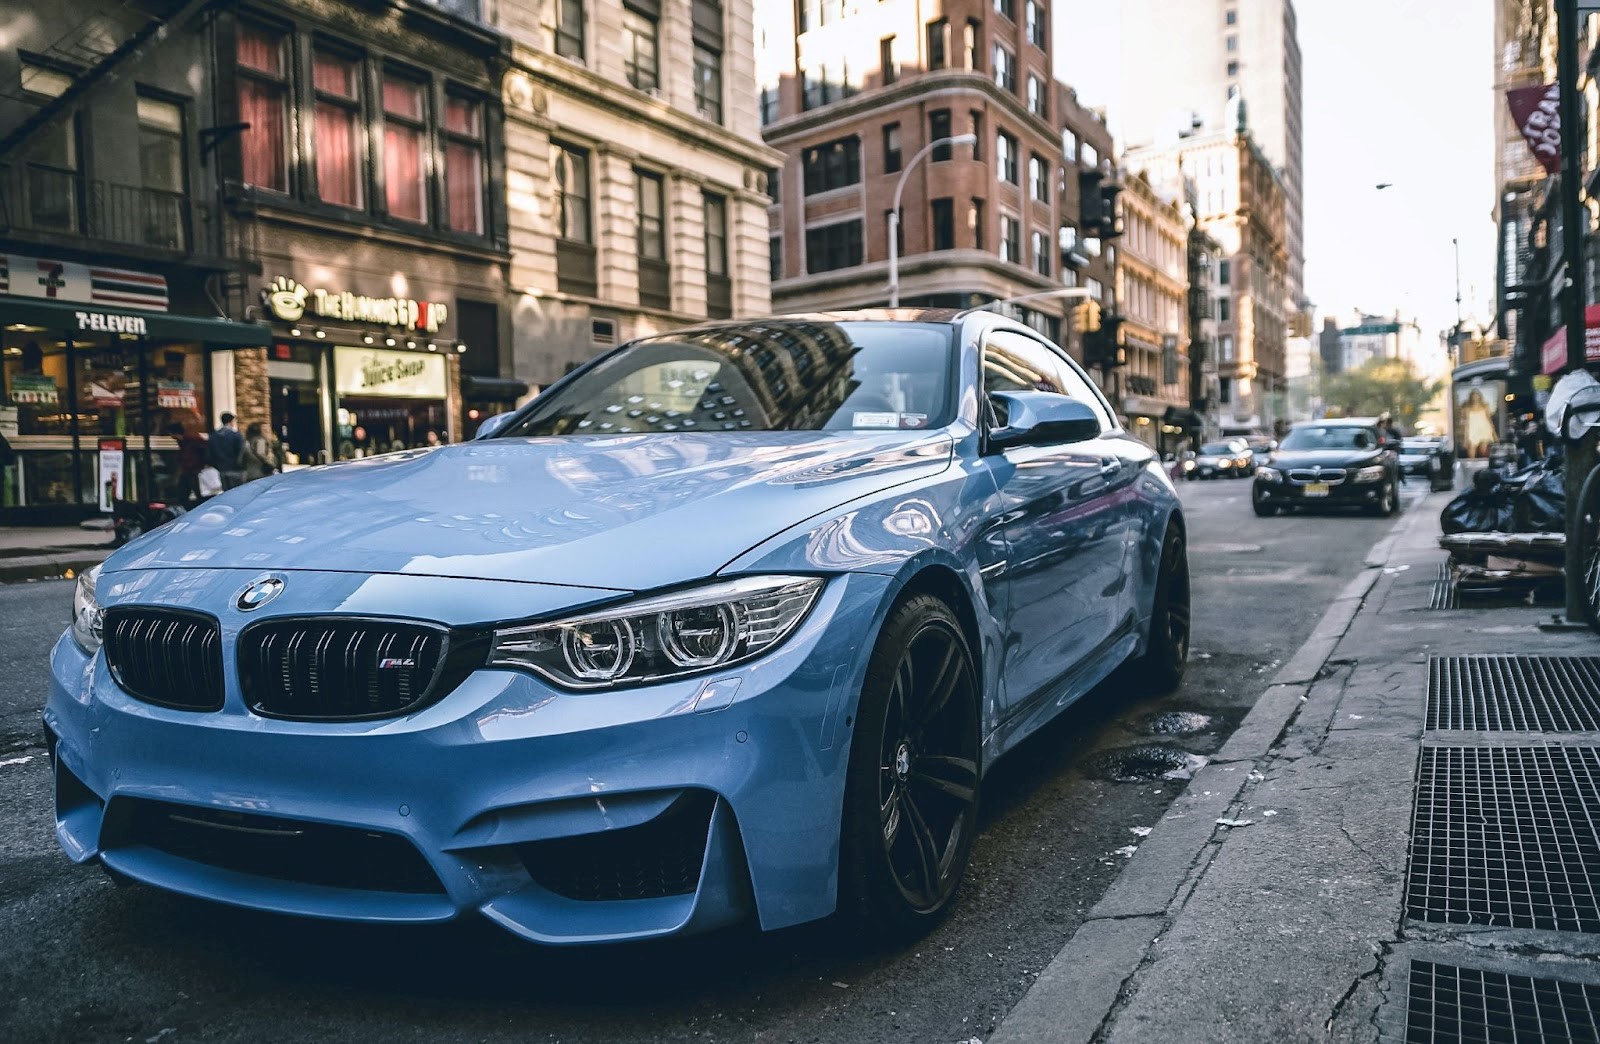 auto,fast cars,dusk,bmw,bmw m5,speed,vehicle,automobile,m power,car,engine,road,power,black car,nature,wheel,black,m5,transport,cars,sports cars,fast,supercars,sunset,luxury,automotive,drive,f90,sport,landscape,m5 f90, german,motor,auto,pasay,germany,philippine international motor show,show,fair,bmw,bmw m5,ride,speed,vehicle,automobile,trip,car,engine,design,power,event,exhibit,philippines,brand,europe,expo,business,race,asia,m5,pims,technology,transport,tour,transportation,fast,trade,name,automotive,drive,travel, auto,fast cars,dusk,bmw,bmw m5,speed,vehicle,automobile,m power,car,engine,road,power,black car,nature,wheel,black,m5,transport,cars,sports cars,fast,supercars,sunset,luxury,automotive,drive,f90,sport,landscape,m5 f90, german,motor,auto,pasay,germany,philippine international motor show,show,fair,bmw,bmw m5,ride,speed,vehicle,automobile,trip,car,engine,design,power,event,exhibit,philippines,brand,europe,expo,business,race,asia,m5,pims,technology,transport,tour,transportation,fast,trade,name,automotive,drive,travel, auto,fast cars,dusk,bmw,bmw m5,speed,vehicle,automobile,m power,car,engine,road,power,black car,nature,wheel,black,m5,transport,cars,sports cars,fast,supercars,sunset,luxury,automotive,drive,f90,sport,landscape,m5 f90, german,motor,auto,pasay,germany,philippine international motor show,show,fair,bmw,bmw m5,ride,speed,vehicle,automobile,trip,car,engine,design,power,event,exhibit,philippines,brand,europe,expo,business,race,asia,m5,pims,technology,transport,tour,transportation,fast,trade,name,automotive,drive,travel, auto,fast cars,dusk,bmw,bmw m5,speed,vehicle,automobile,m power,car,engine,road,power,black car,nature,wheel,black,m5,transport,cars,sports cars,fast,supercars,sunset,luxury,automotive,drive,f90,sport,landscape,m5 f90, german,motor,auto,pasay,germany,philippine international motor show,show,fair,bmw,bmw m5,ride,speed,vehicle,automobile,trip,car,engine,design,power,event,exhibit,philippines,brand,europe,expo,business,race,asia,m5,pims,technology,transport,tour,transportation,fast,trade,name,automotive,drive,travel, auto,fast cars,dusk,bmw,bmw m5,speed,vehicle,automobile,m power,car,engine,road,power,black car,nature,wheel,black,m5,transport,cars,sports cars,fast,supercars,sunset,luxury,automotive,drive,f90,sport,landscape,m5 f90, german,motor,auto,pasay,germany,philippine international motor show,show,fair,bmw,bmw m5,ride,speed,vehicle,automobile,trip,car,engine,design,power,event,exhibit,philippines,brand,europe,expo,business,race,asia,m5,pims,technology,transport,tour,transportation,fast,trade,name,automotive,drive,travel, auto,fast cars,dusk,bmw,bmw m5,speed,vehicle,automobile,m power,car,engine,road,power,black car,nature,wheel,black,m5,transport,cars,sports cars,fast,supercars,sunset,luxury,automotive,drive,f90,sport,landscape,m5 f90, german,motor,auto,pasay,germany,philippine international motor show,show,fair,bmw,bmw m5,ride,speed,vehicle,automobile,trip,car,engine,design,power,event,exhibit,philippines,brand,europe,expo,business,race,asia,m5,pims,technology,transport,tour,transportation,fast,trade,name,automotive,drive,travel, auto,fast cars,dusk,bmw,bmw m5,speed,vehicle,automobile,m power,car,engine,road,power,black car,nature,wheel,black,m5,transport,cars,sports cars,fast,supercars,sunset,luxury,automotive,drive,f90,sport,landscape,m5 f90, german,motor,auto,pasay,germany,philippine international motor show,show,fair,bmw,bmw m5,ride,speed,vehicle,automobile,trip,car,engine,design,power,event,exhibit,philippines,brand,europe,expo,business,race,asia,m5,pims,technology,transport,tour,transportation,fast,trade,name,automotive,drive,travel, auto,fast cars,dusk,bmw,bmw m5,speed,vehicle,automobile,m power,car,engine,road,power,black car,nature,wheel,black,m5,transport,cars,sports cars,fast,supercars,sunset,luxury,automotive,drive,f90,sport,landscape,m5 f90, german,motor,auto,pasay,germany,philippine international motor show,show,fair,bmw,bmw m5,ride,speed,vehicle,automobile,trip,car,engine,design,power,event,exhibit,philippines,brand,europe,expo,business,race,asia,m5,pims,technology,transport,tour,transportation,fast,trade,name,automotive,drive,travel, auto,fast cars,dusk,bmw,bmw m5,speed,vehicle,automobile,m power,car,engine,road,power,black car,nature,wheel,black,m5,transport,cars,sports cars,fast,supercars,sunset,luxury,automotive,drive,f90,sport,landscape,m5 f90, german,motor,auto,pasay,germany,philippine international motor show,show,fair,bmw,bmw m5,ride,speed,vehicle,automobile,trip,car,engine,design,power,event,exhibit,philippines,brand,europe,expo,business,race,asia,m5,pims,technology,transport,tour,transportation,fast,trade,name,automotive,drive,travel, auto,fast cars,dusk,bmw,bmw m5,speed,vehicle,automobile,m power,car,engine,road,power,black car,nature,wheel,black,m5,transport,cars,sports cars,fast,supercars,sunset,luxury,automotive,drive,f90,sport,landscape,m5 f90, german,motor,auto,pasay,germany,philippine international motor show,show,fair,bmw,bmw m5,ride,speed,vehicle,automobile,trip,car,engine,design,power,event,exhibit,philippines,brand,europe,expo,business,race,asia,m5,pims,technology,transport,tour,transportation,fast,trade,name,automotive,drive,travel, auto,fast cars,dusk,bmw,bmw m5,speed,vehicle,automobile,m power,car,engine,road,power,black car,nature,wheel,black,m5,transport,cars,sports cars,fast,supercars,sunset,luxury,automotive,drive,f90,sport,landscape,m5 f90, german,motor,auto,pasay,germany,philippine international motor show,show,fair,bmw,bmw m5,ride,speed,vehicle,automobile,trip,car,engine,design,power,event,exhibit,philippines,brand,europe,expo,business,race,asia,m5,pims,technology,transport,tour,transportation,fast,trade,name,automotive,drive,travel, auto,fast cars,dusk,bmw,bmw m5,speed,vehicle,automobile,m power,car,engine,road,power,black car,nature,wheel,black,m5,transport,cars,sports cars,fast,supercars,sunset,luxury,automotive,drive,f90,sport,landscape,m5 f90, german,motor,auto,pasay,germany,philippine international motor show,show,fair,bmw,bmw m5,ride,speed,vehicle,automobile,trip,car,engine,design,power,event,exhibit,philippines,brand,europe,expo,business,race,asia,m5,pims,technology,transport,tour,transportation,fast,trade,name,automotive,drive,travel, auto,fast cars,dusk,bmw,bmw m5,speed,vehicle,automobile,m power,car,engine,road,power,black car,nature,wheel,black,m5,transport,cars,sports cars,fast,supercars,sunset,luxury,automotive,drive,f90,sport,landscape,m5 f90, german,motor,auto,pasay,germany,philippine international motor show,show,fair,bmw,bmw m5,ride,speed,vehicle,automobile,trip,car,engine,design,power,event,exhibit,philippines,brand,europe,expo,business,race,asia,m5,pims,technology,transport,tour,transportation,fast,trade,name,automotive,drive,travel,